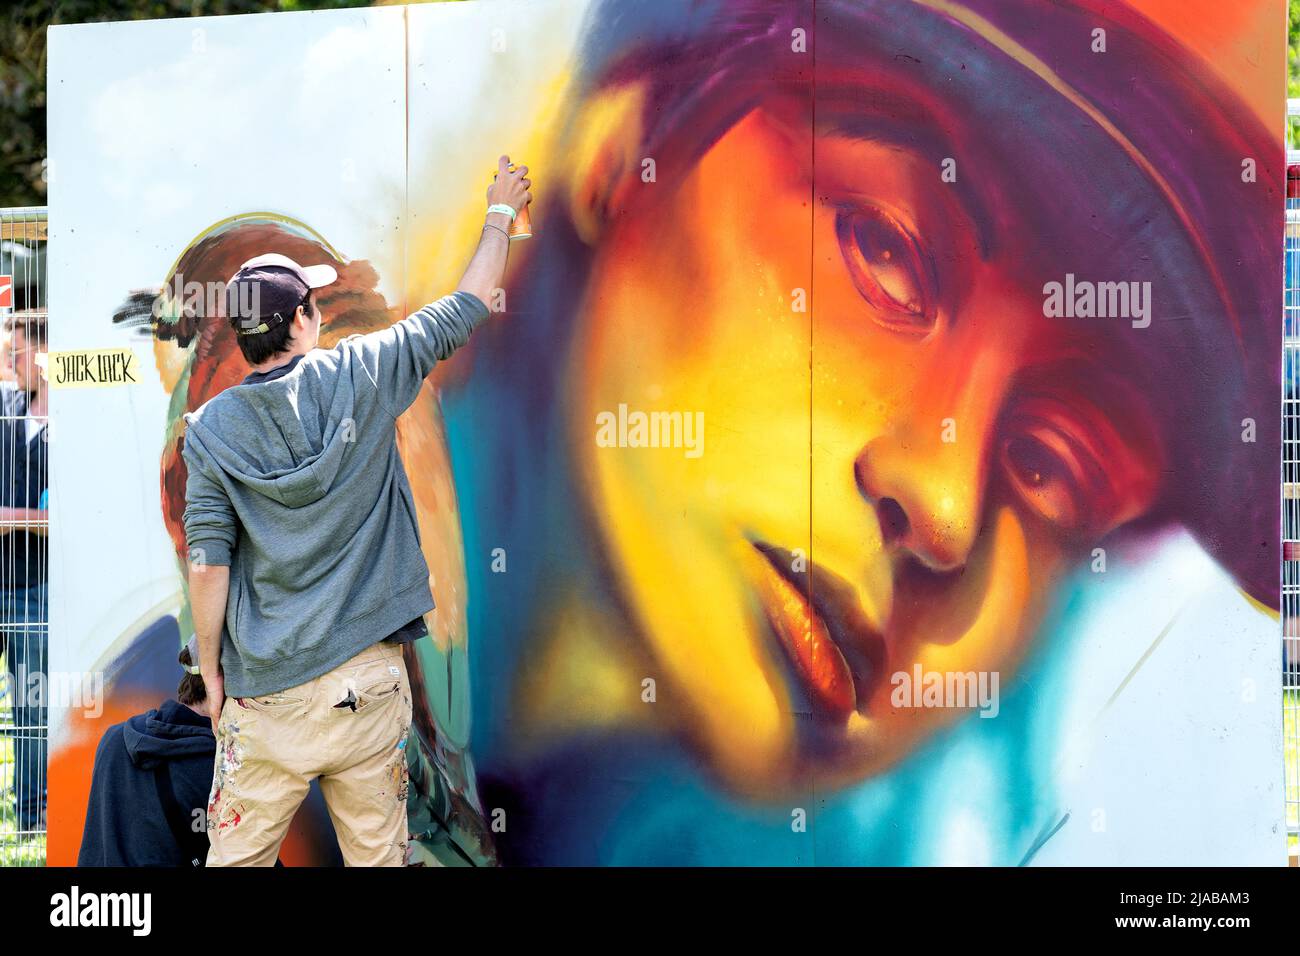 Bristol, UK. 28th May 2022. Street artist, Jack Lack, works on a large mural during the Bristol Upfest, 2022, festival. Europe's largest Street Art Stock Photo